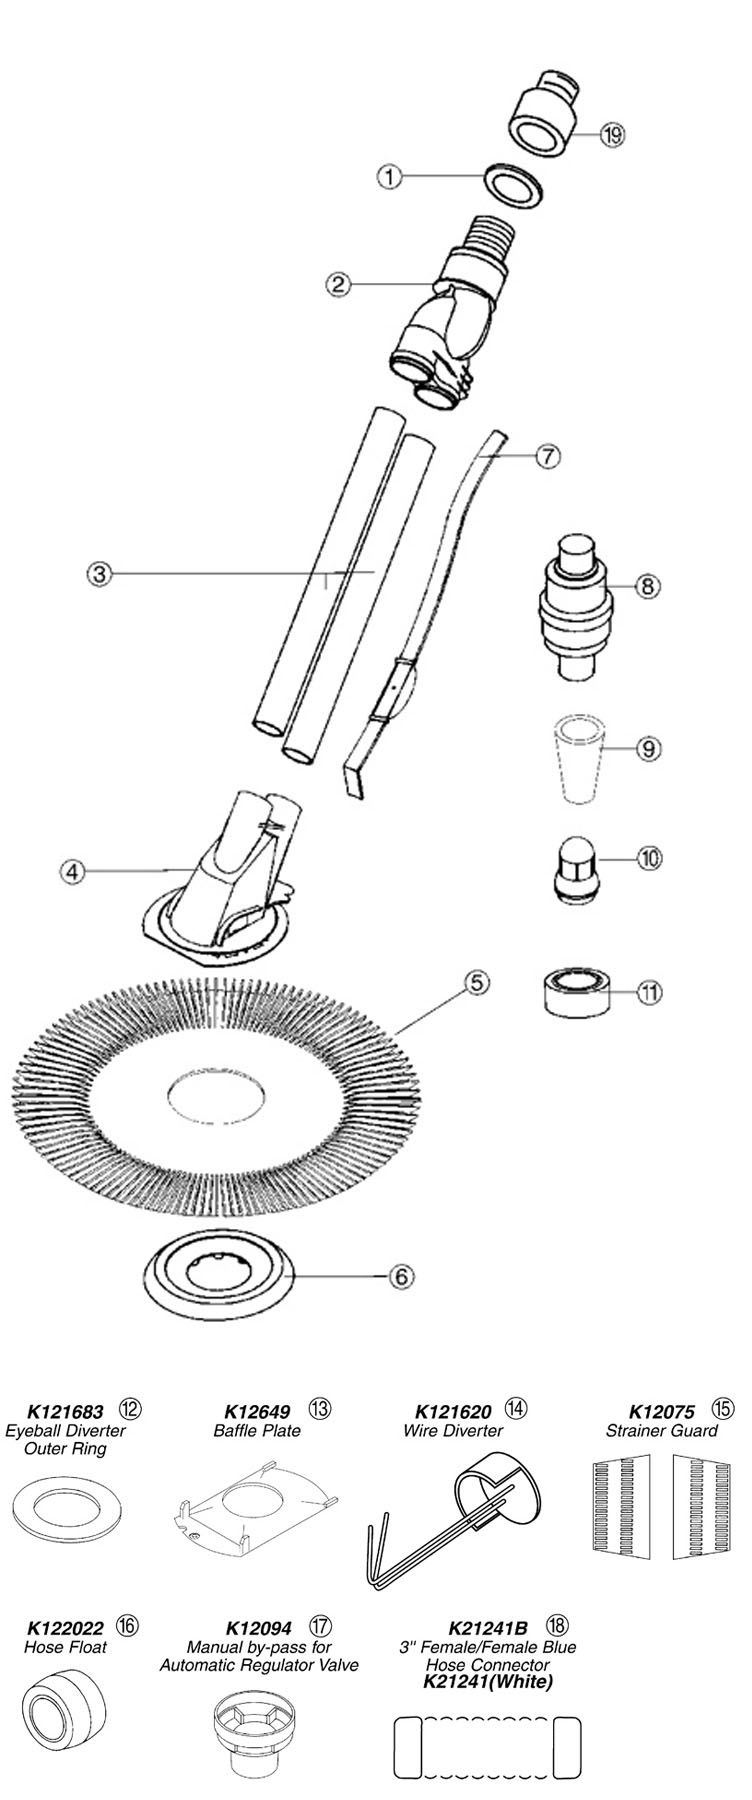 Pentair Kreepy Krauly E-Z Vac Above Ground Suction Pool Cleaner | K50600 Parts Schematic